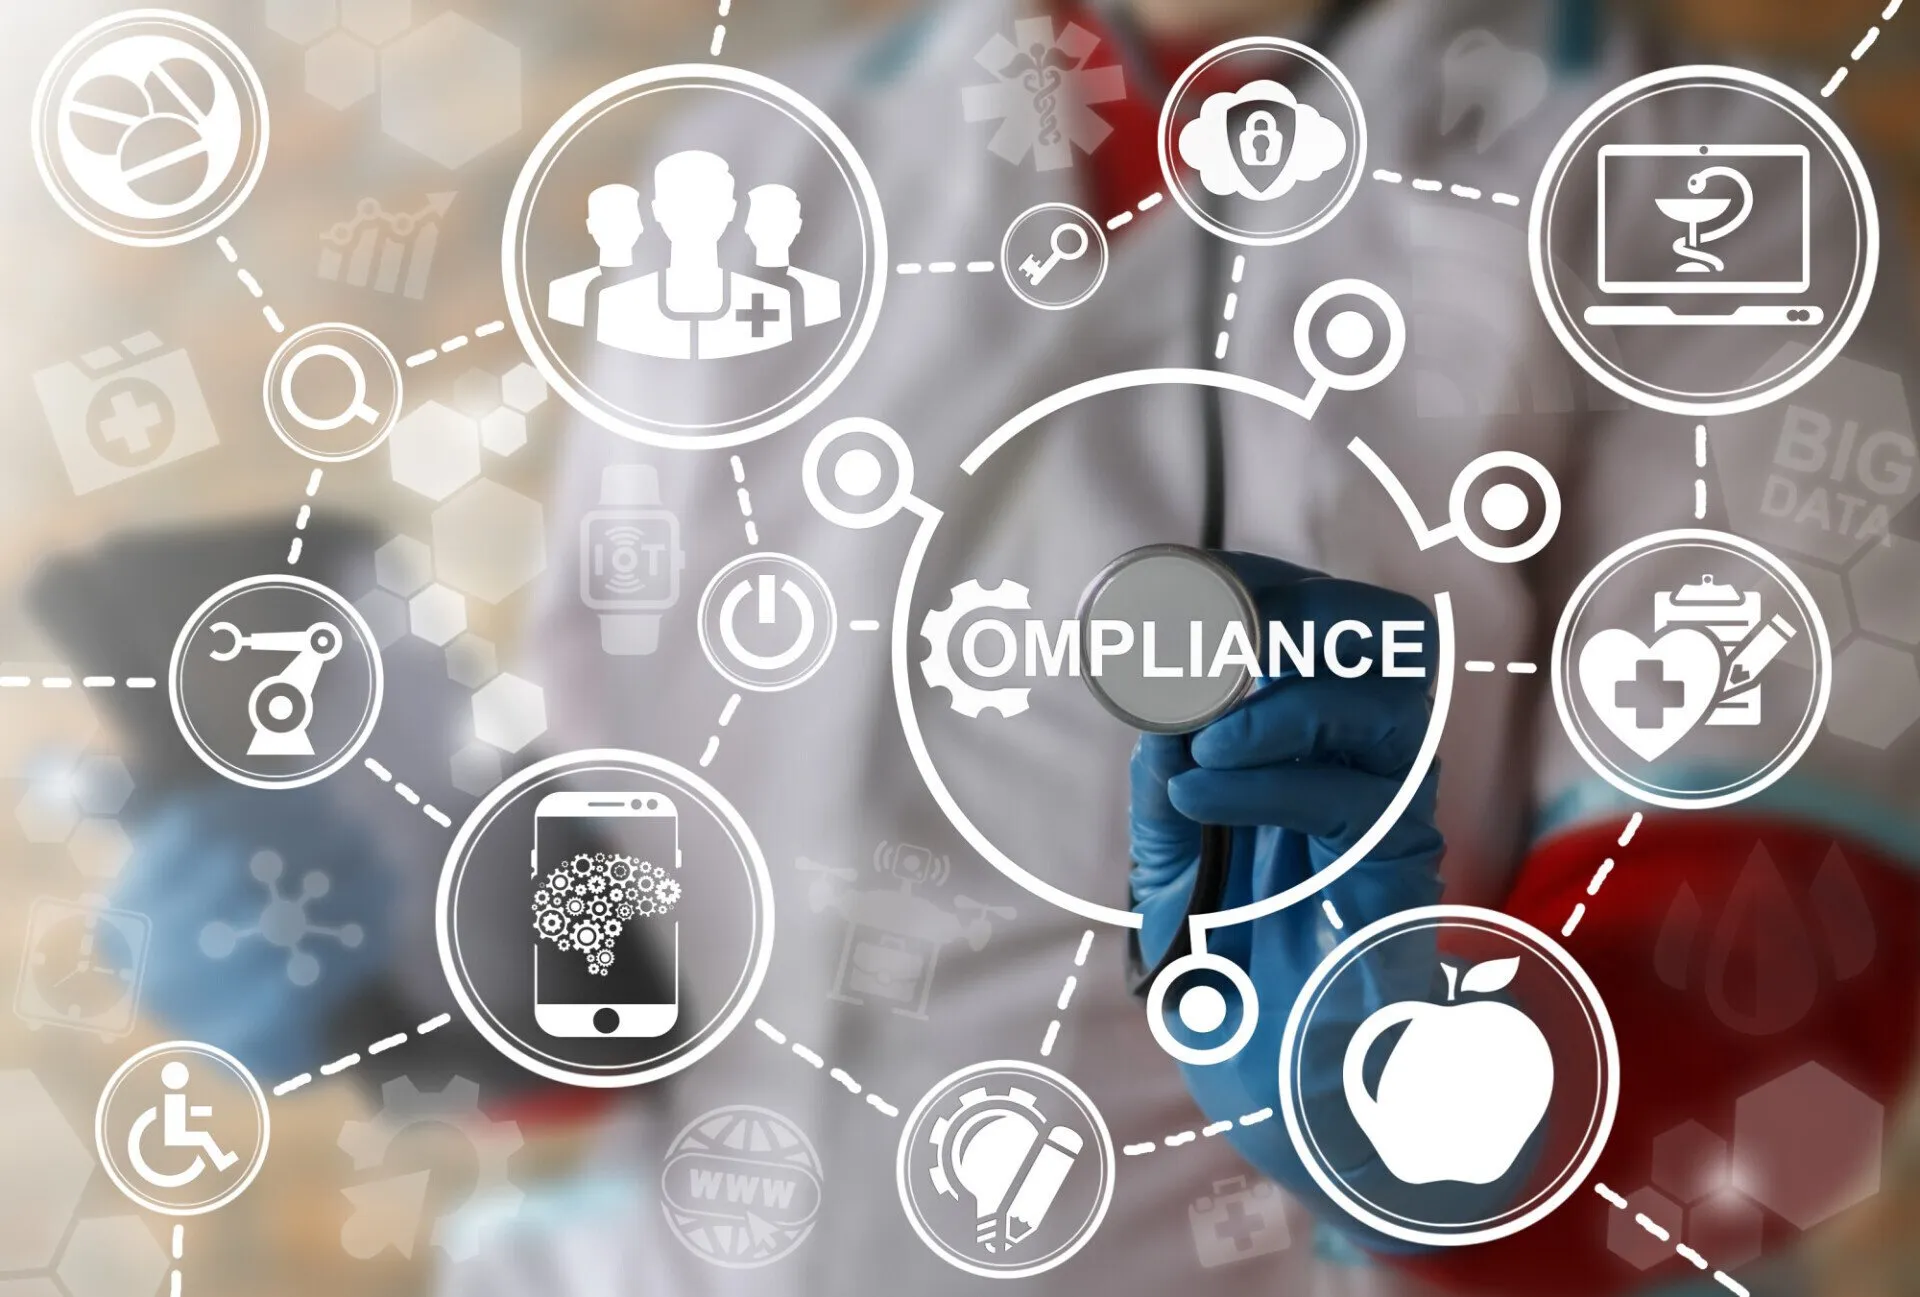 5 Uses of Business Compliance Software To Improve Workplace Efficiency